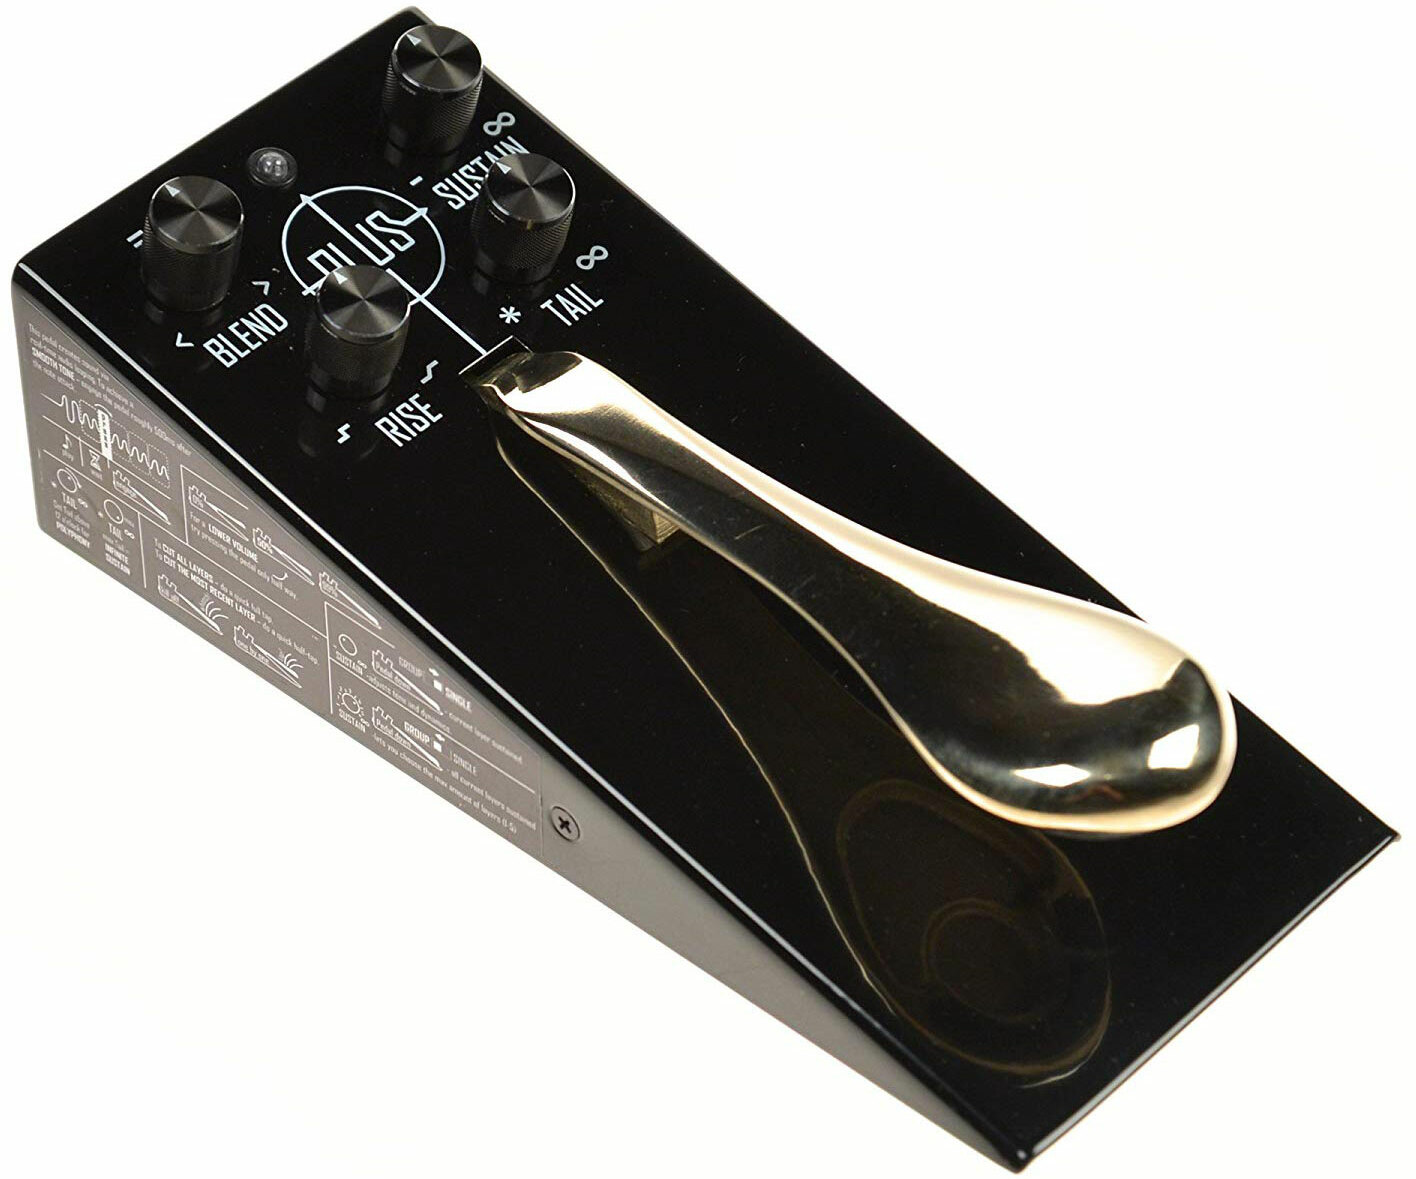 Game Changer Plus Pedal Sustain - Pedal compresor / sustain / noise gate - Main picture